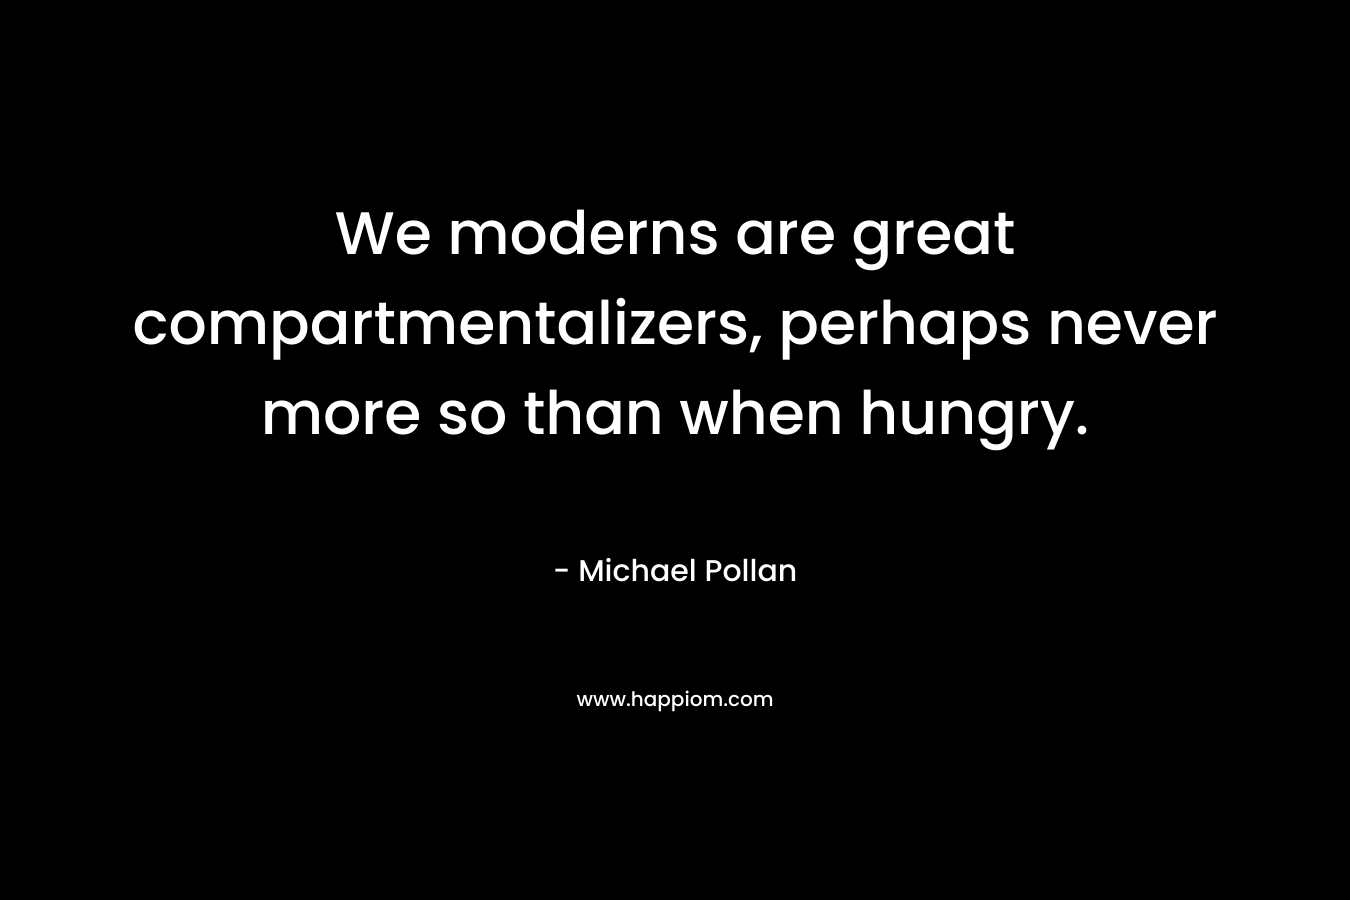 We moderns are great compartmentalizers, perhaps never more so than when hungry. – Michael Pollan